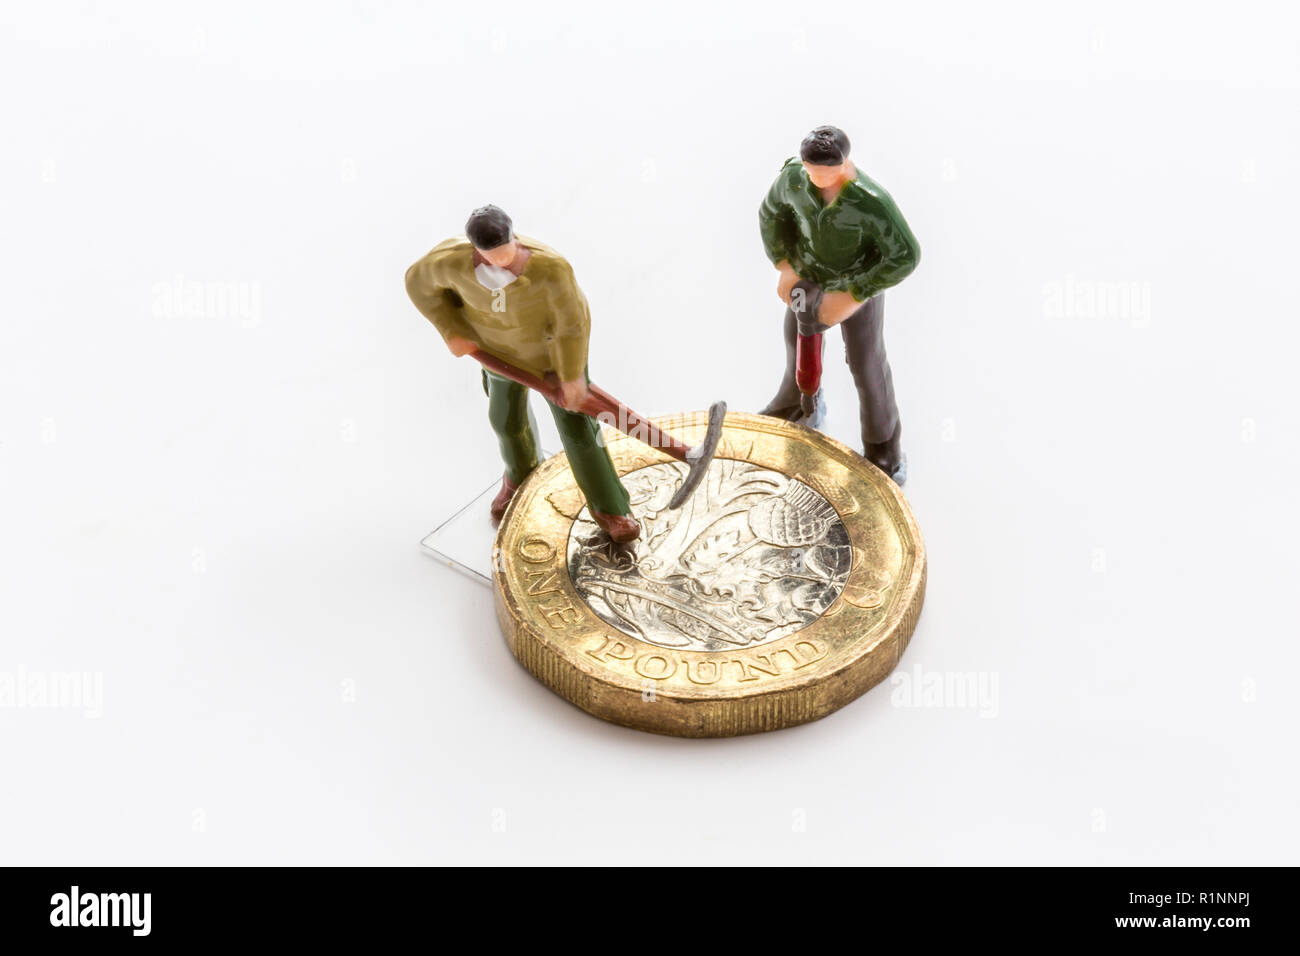 Making or destroying money. Pound coin with miniature workmen. Stock Photo